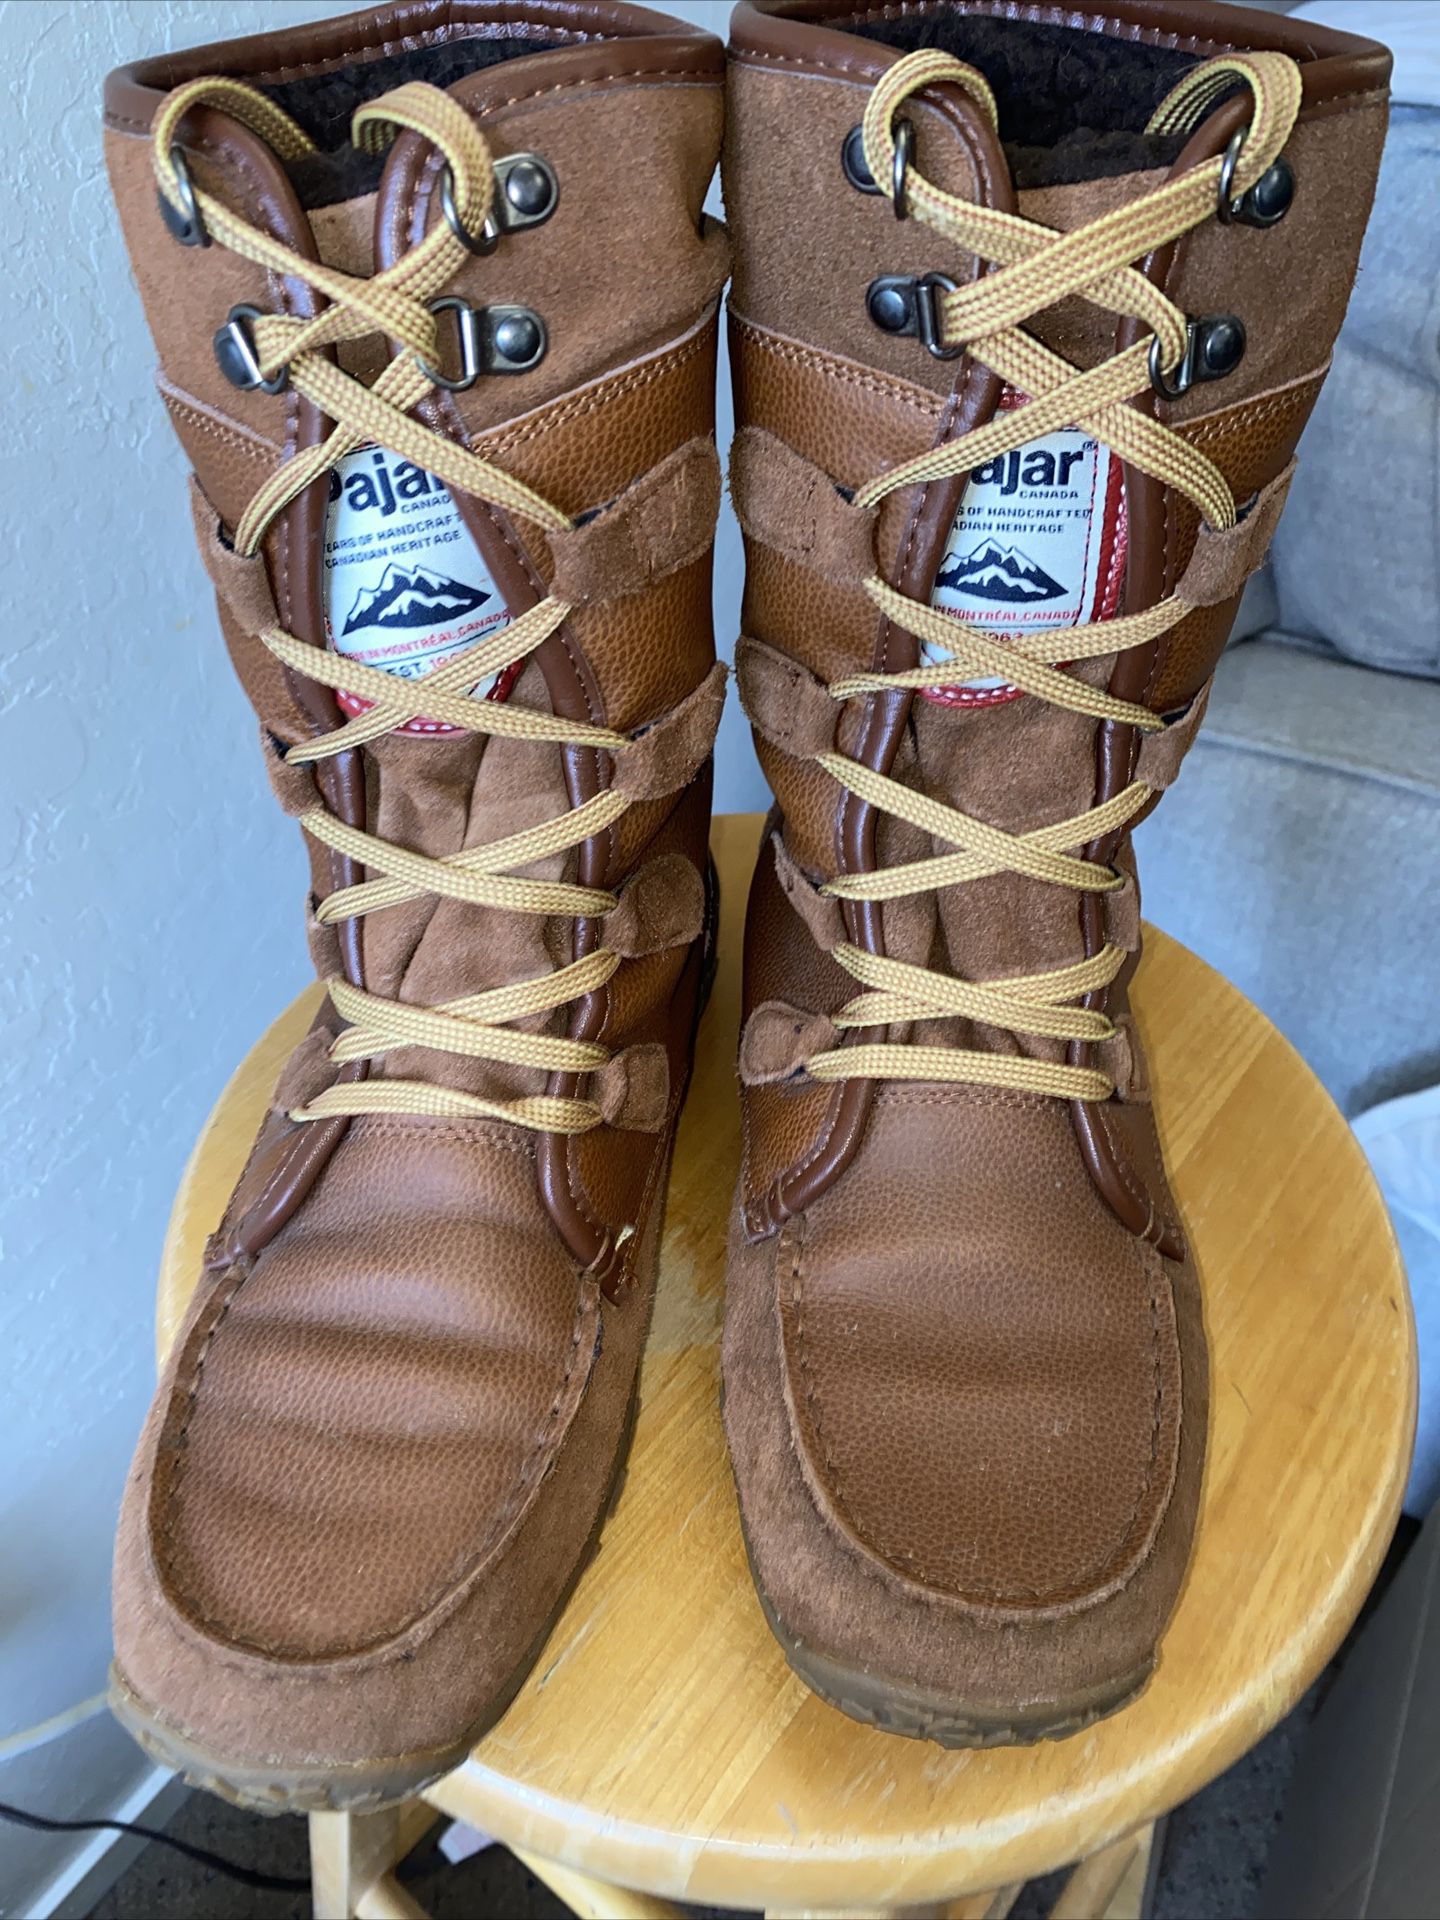 Uitgebreid Opwekking levend Pajar Canada Brown Leather Snow boots Size 7/7.5 for Sale in San Jose, CA -  OfferUp